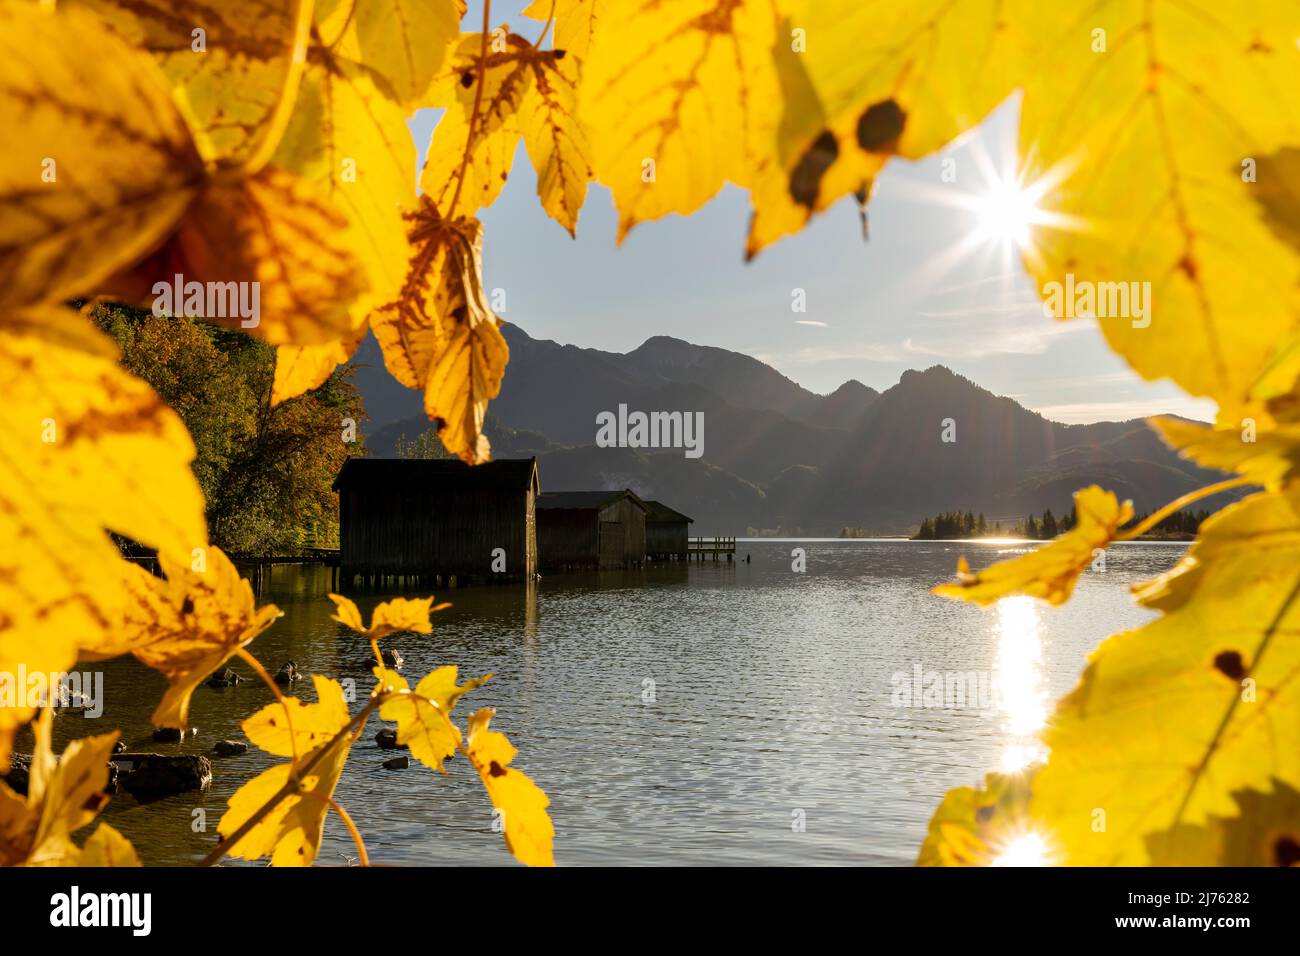 Sunstar and fishermen huts at Kochelsee framed by autumn foliage, maple leaves fotogrfafiert7. Stock Photo